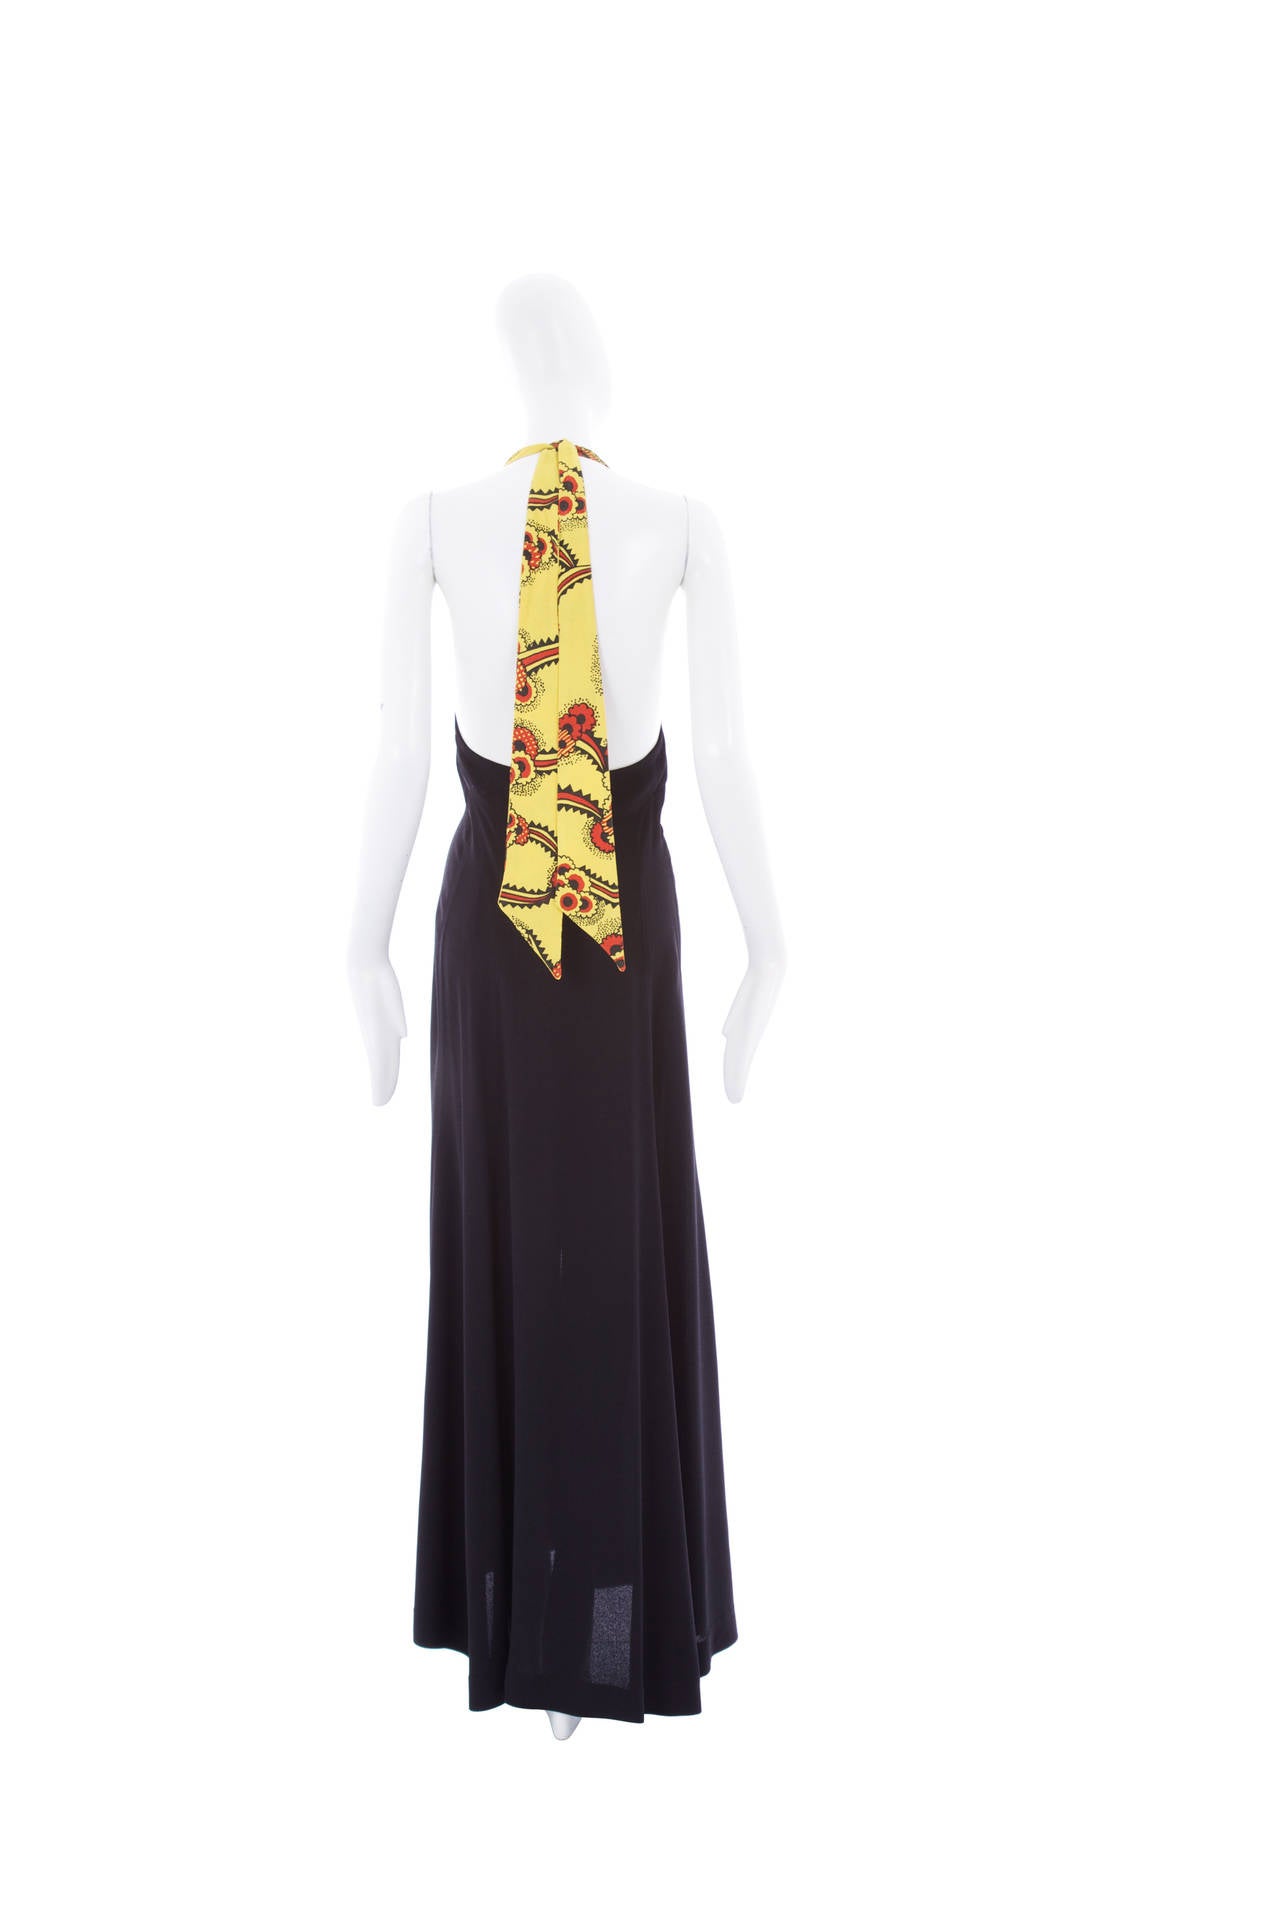 An iconic halter neck dress by Ossie Clark featuring Celia Birtwell’s instantly recognizable Mystic Daisy print on the bust in vibrant shades of yellow and red. The dress ties at the back of the neck and features matching moss crepe buttons. The